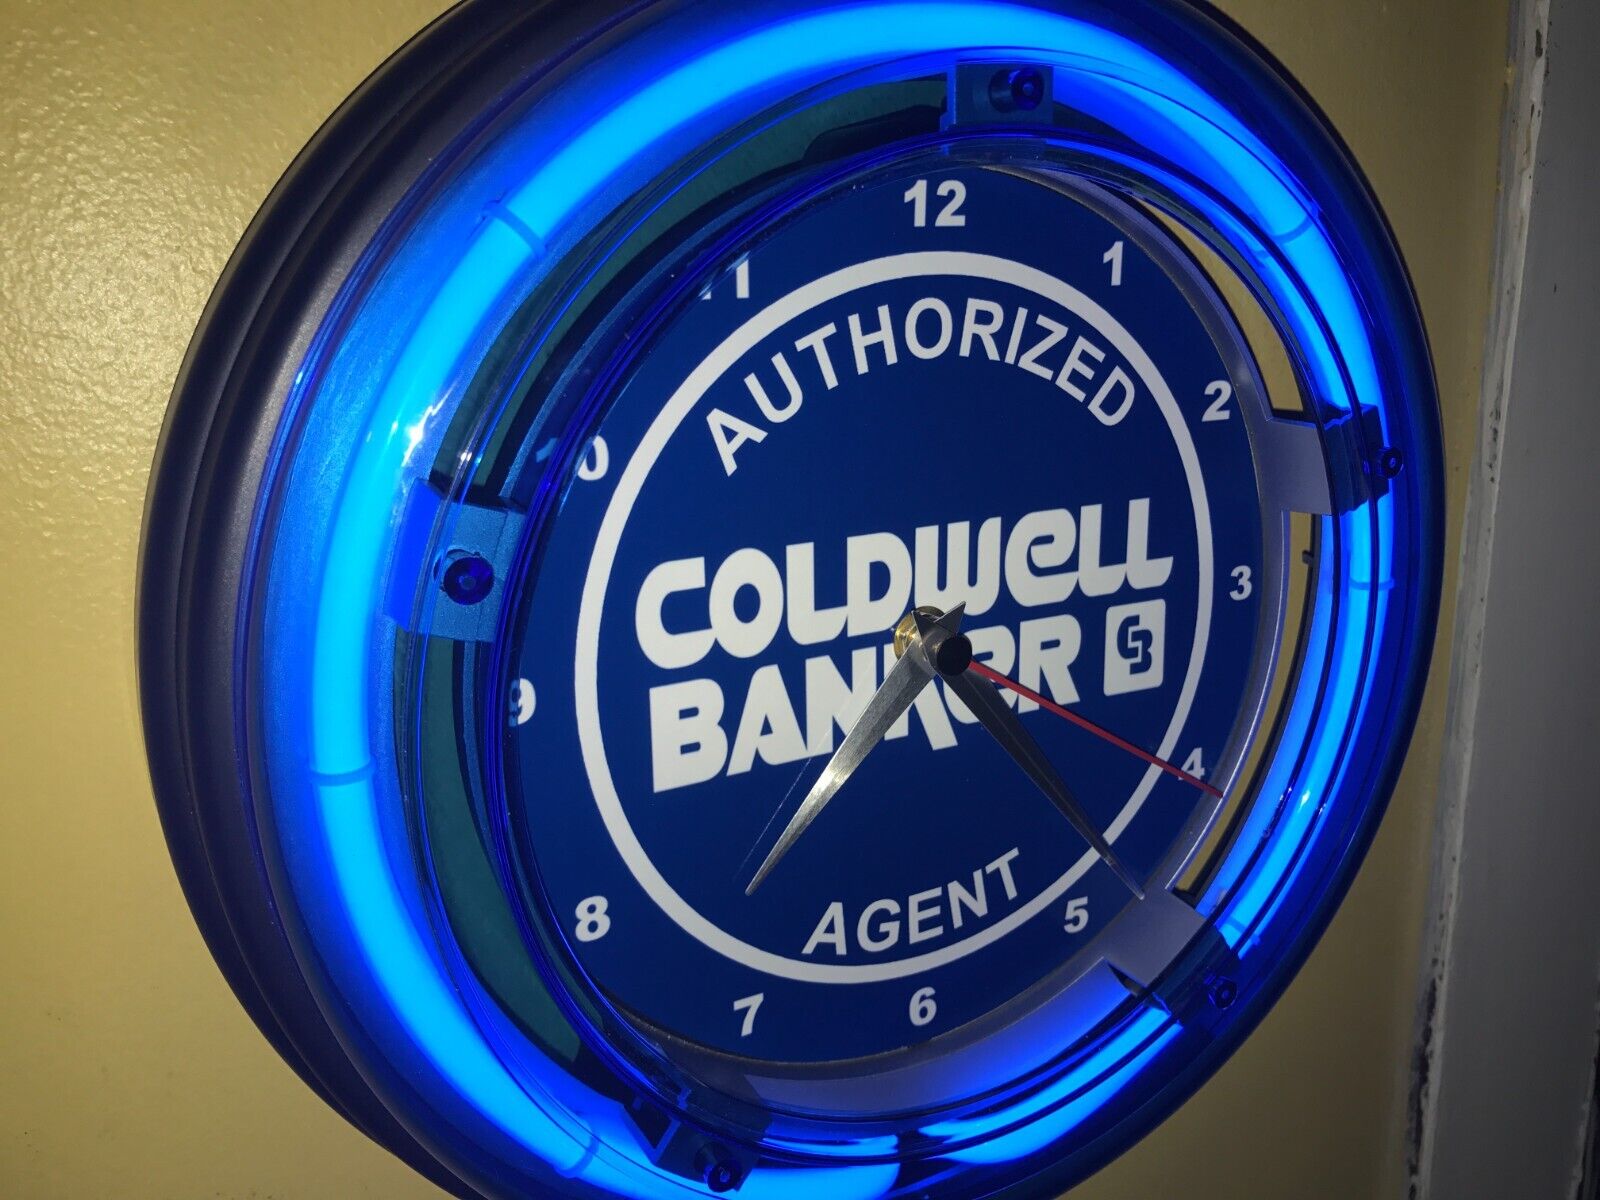 Coldwell Banker Real Estate Agent Office Advertising Neon Wall Clock Sign